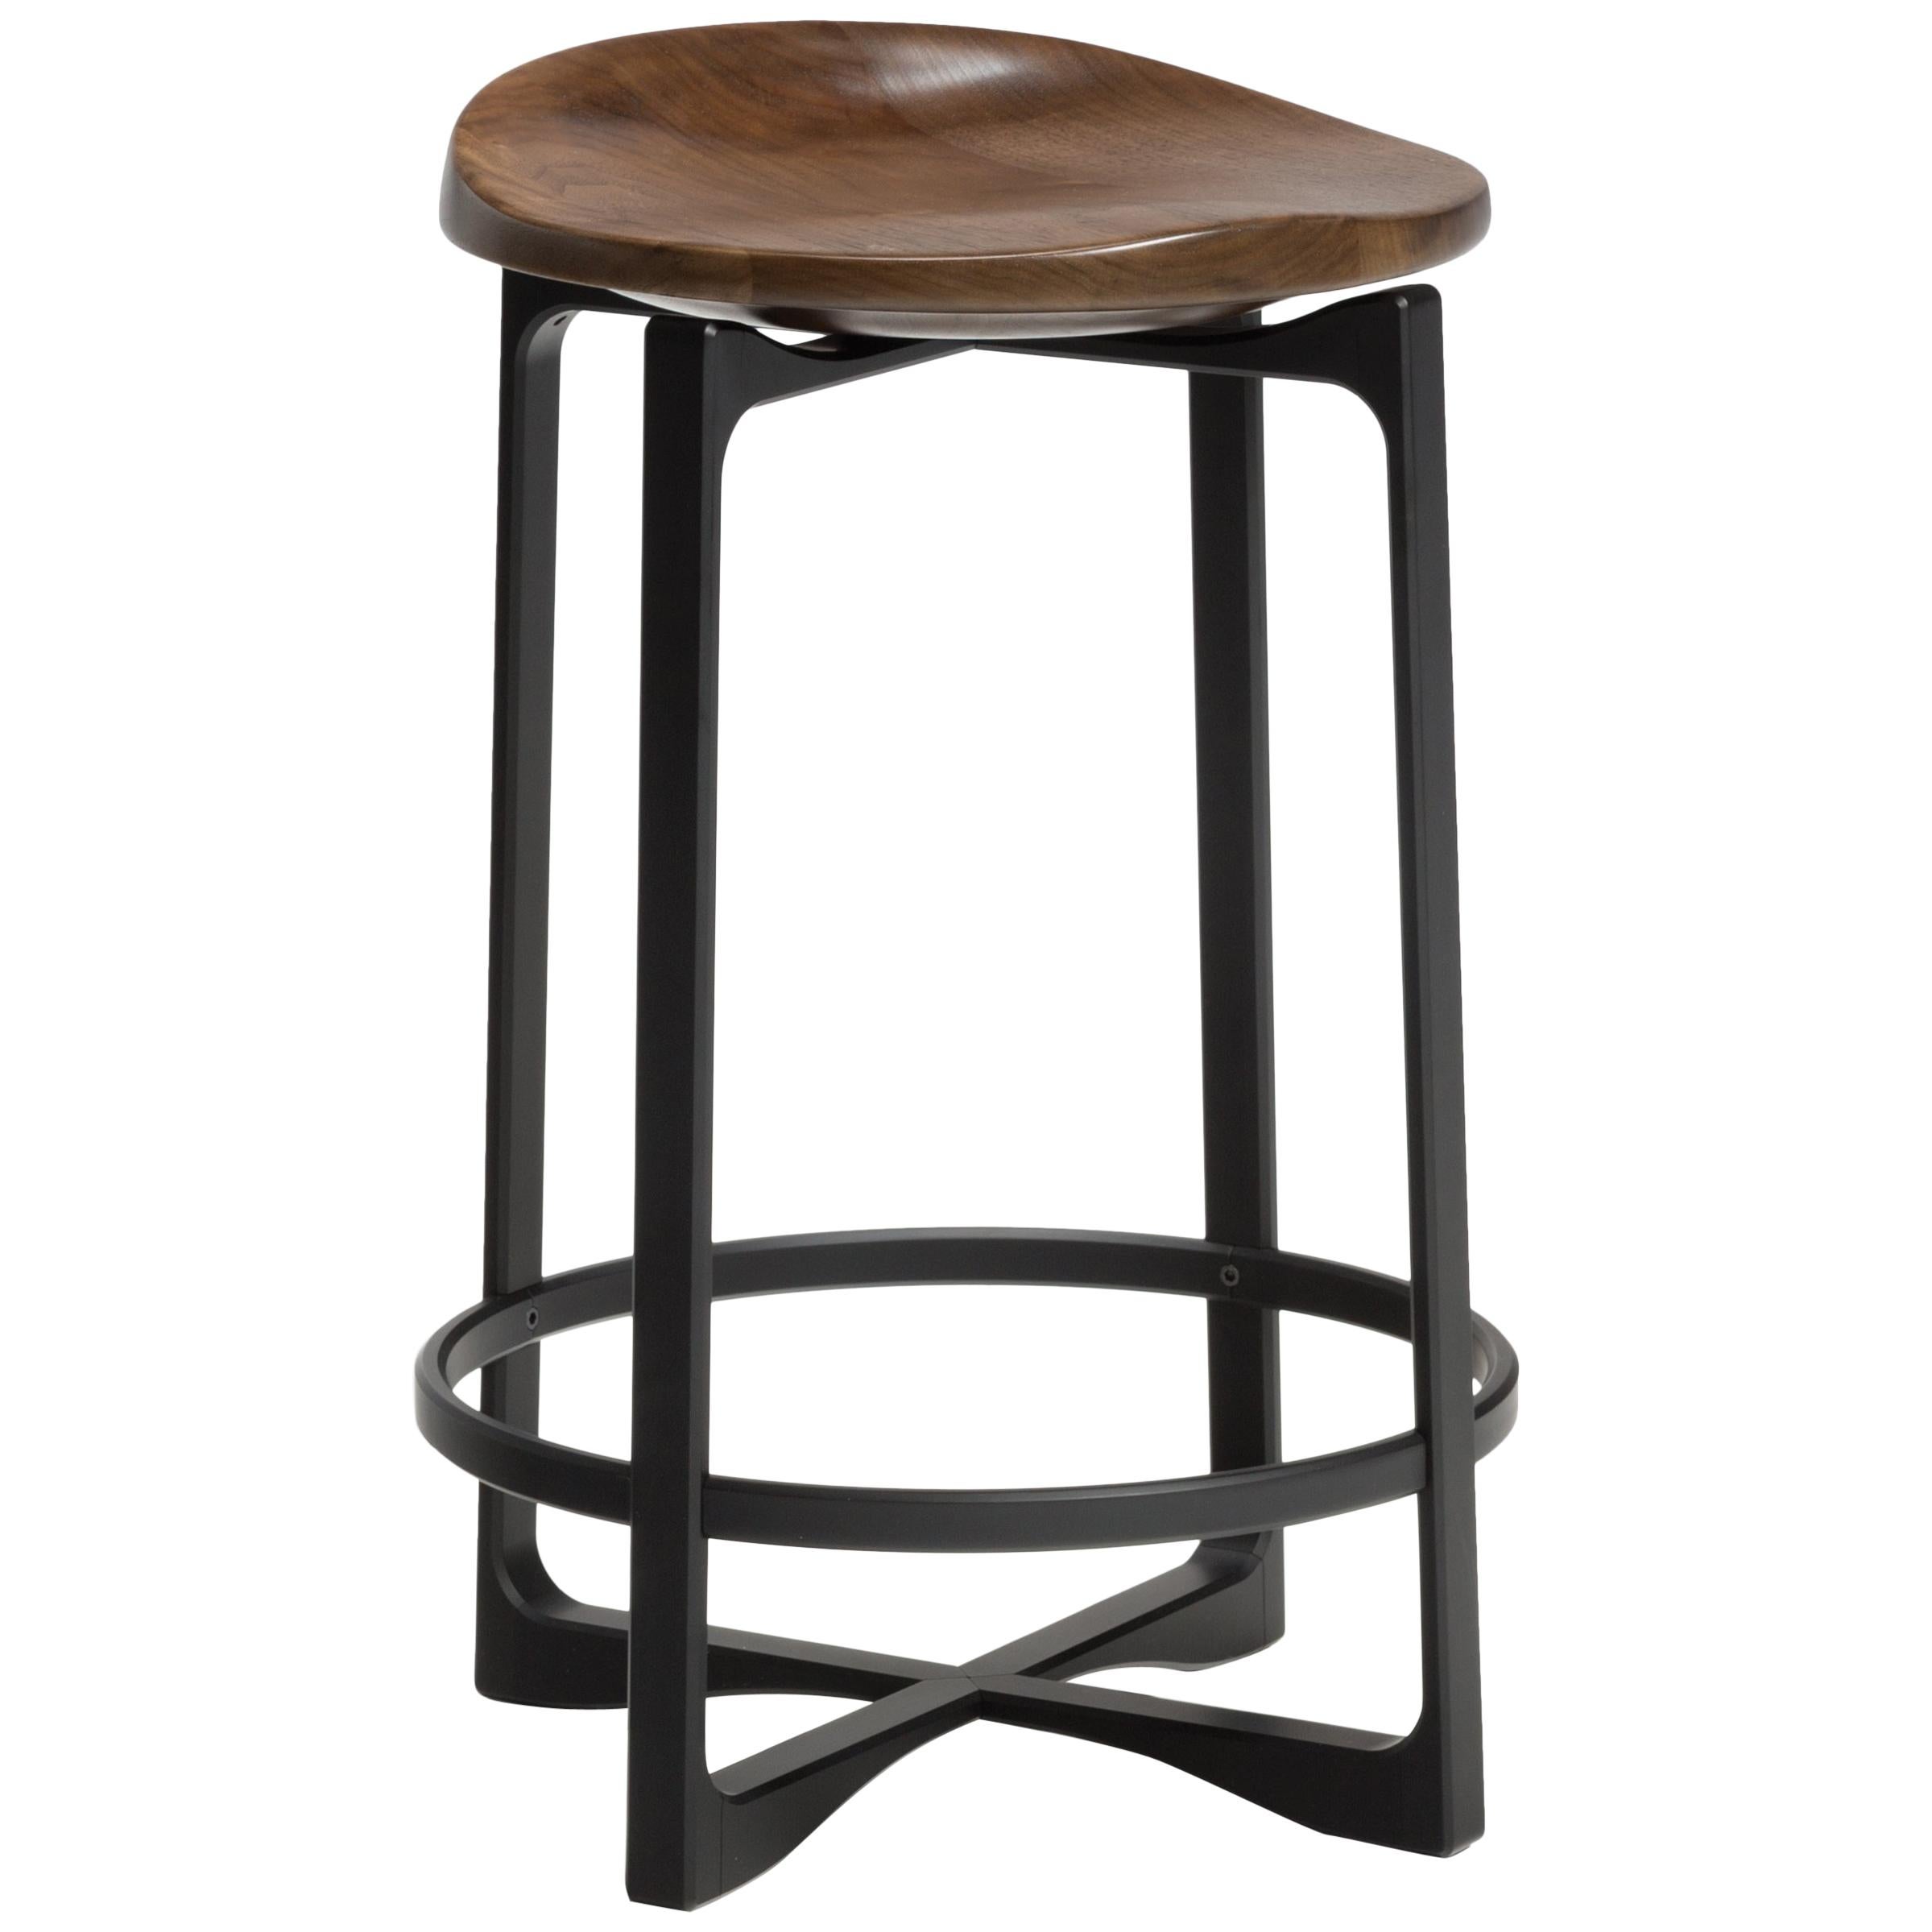 HOLLY HUNT Pepper Counter Stool with Walnut Cinder Seat and Aluminum Frame